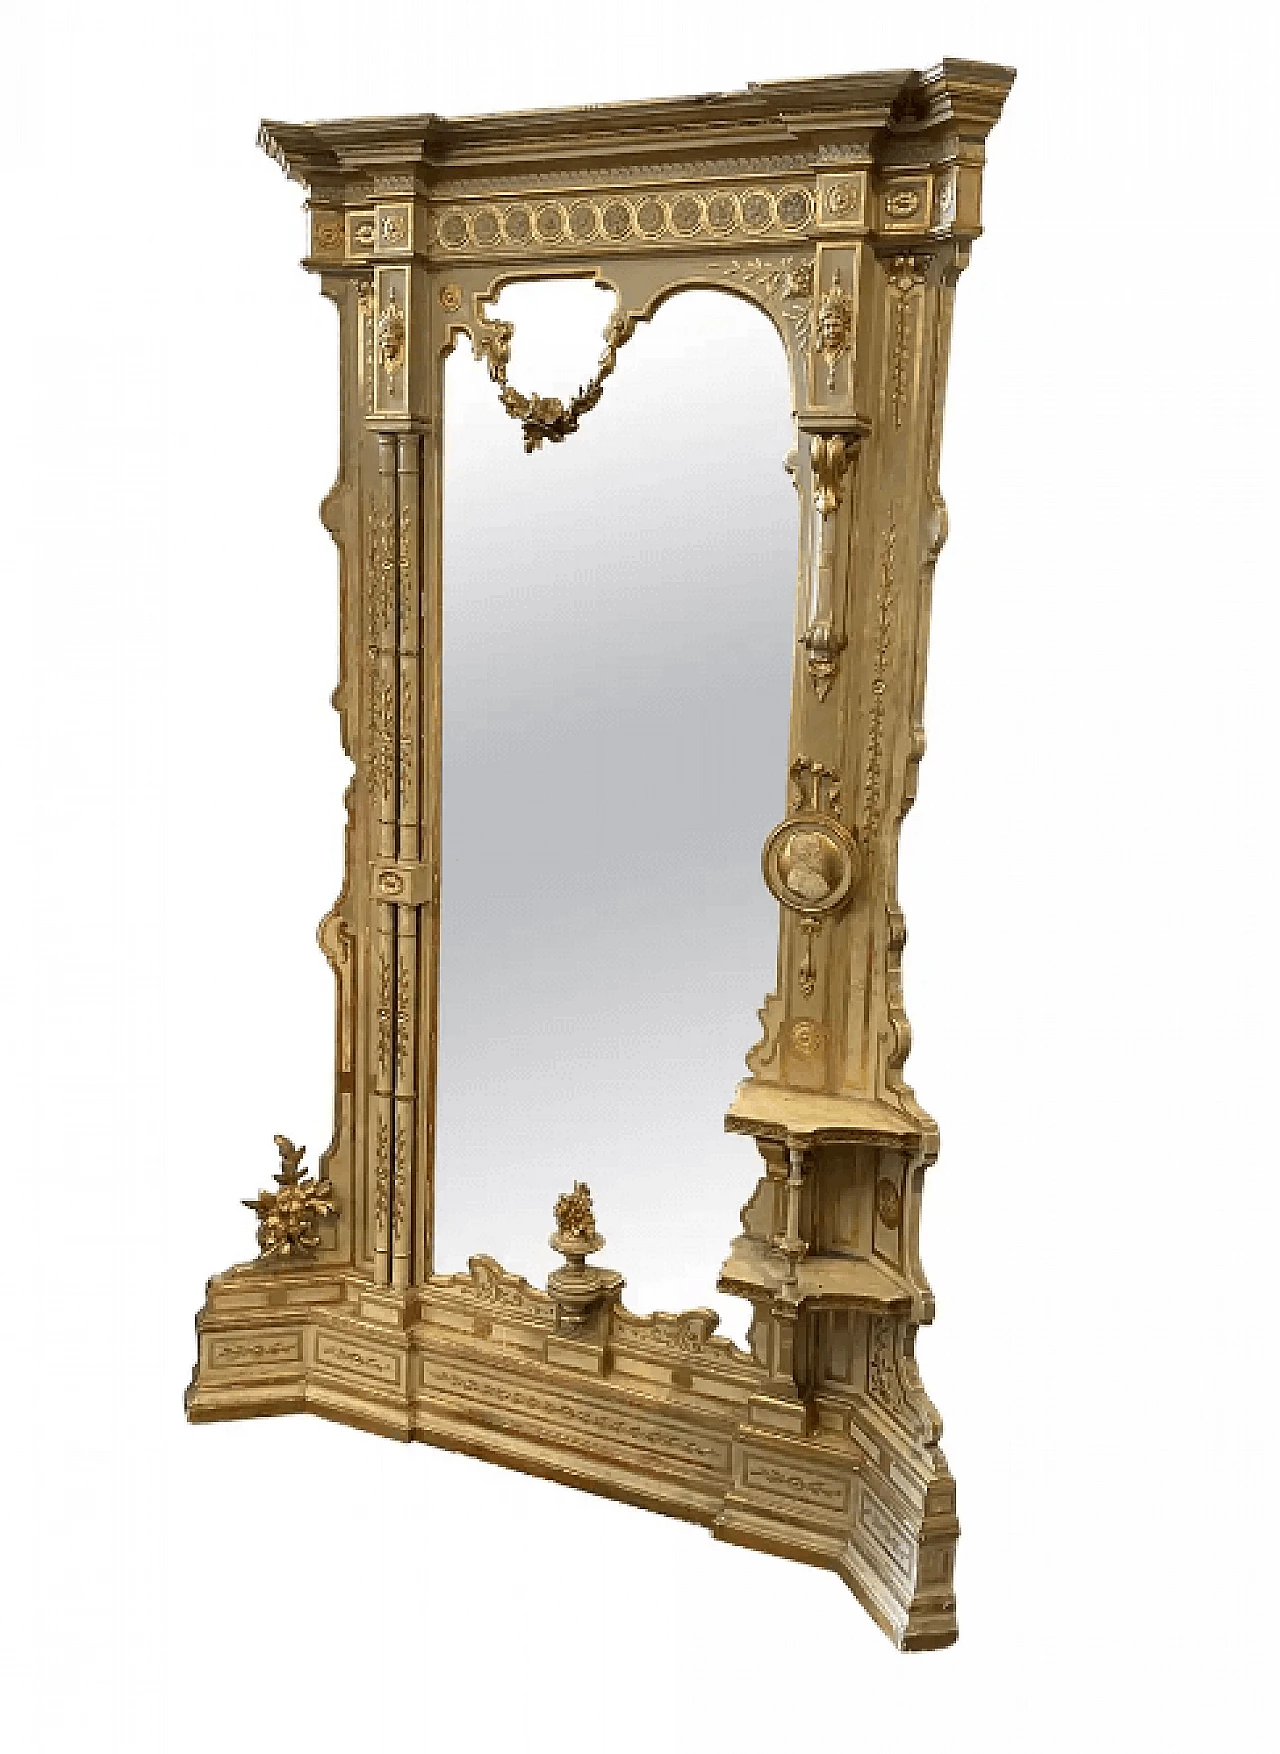 Sicilian lacquered and gilded wooden floor mirror, late 19th century 1